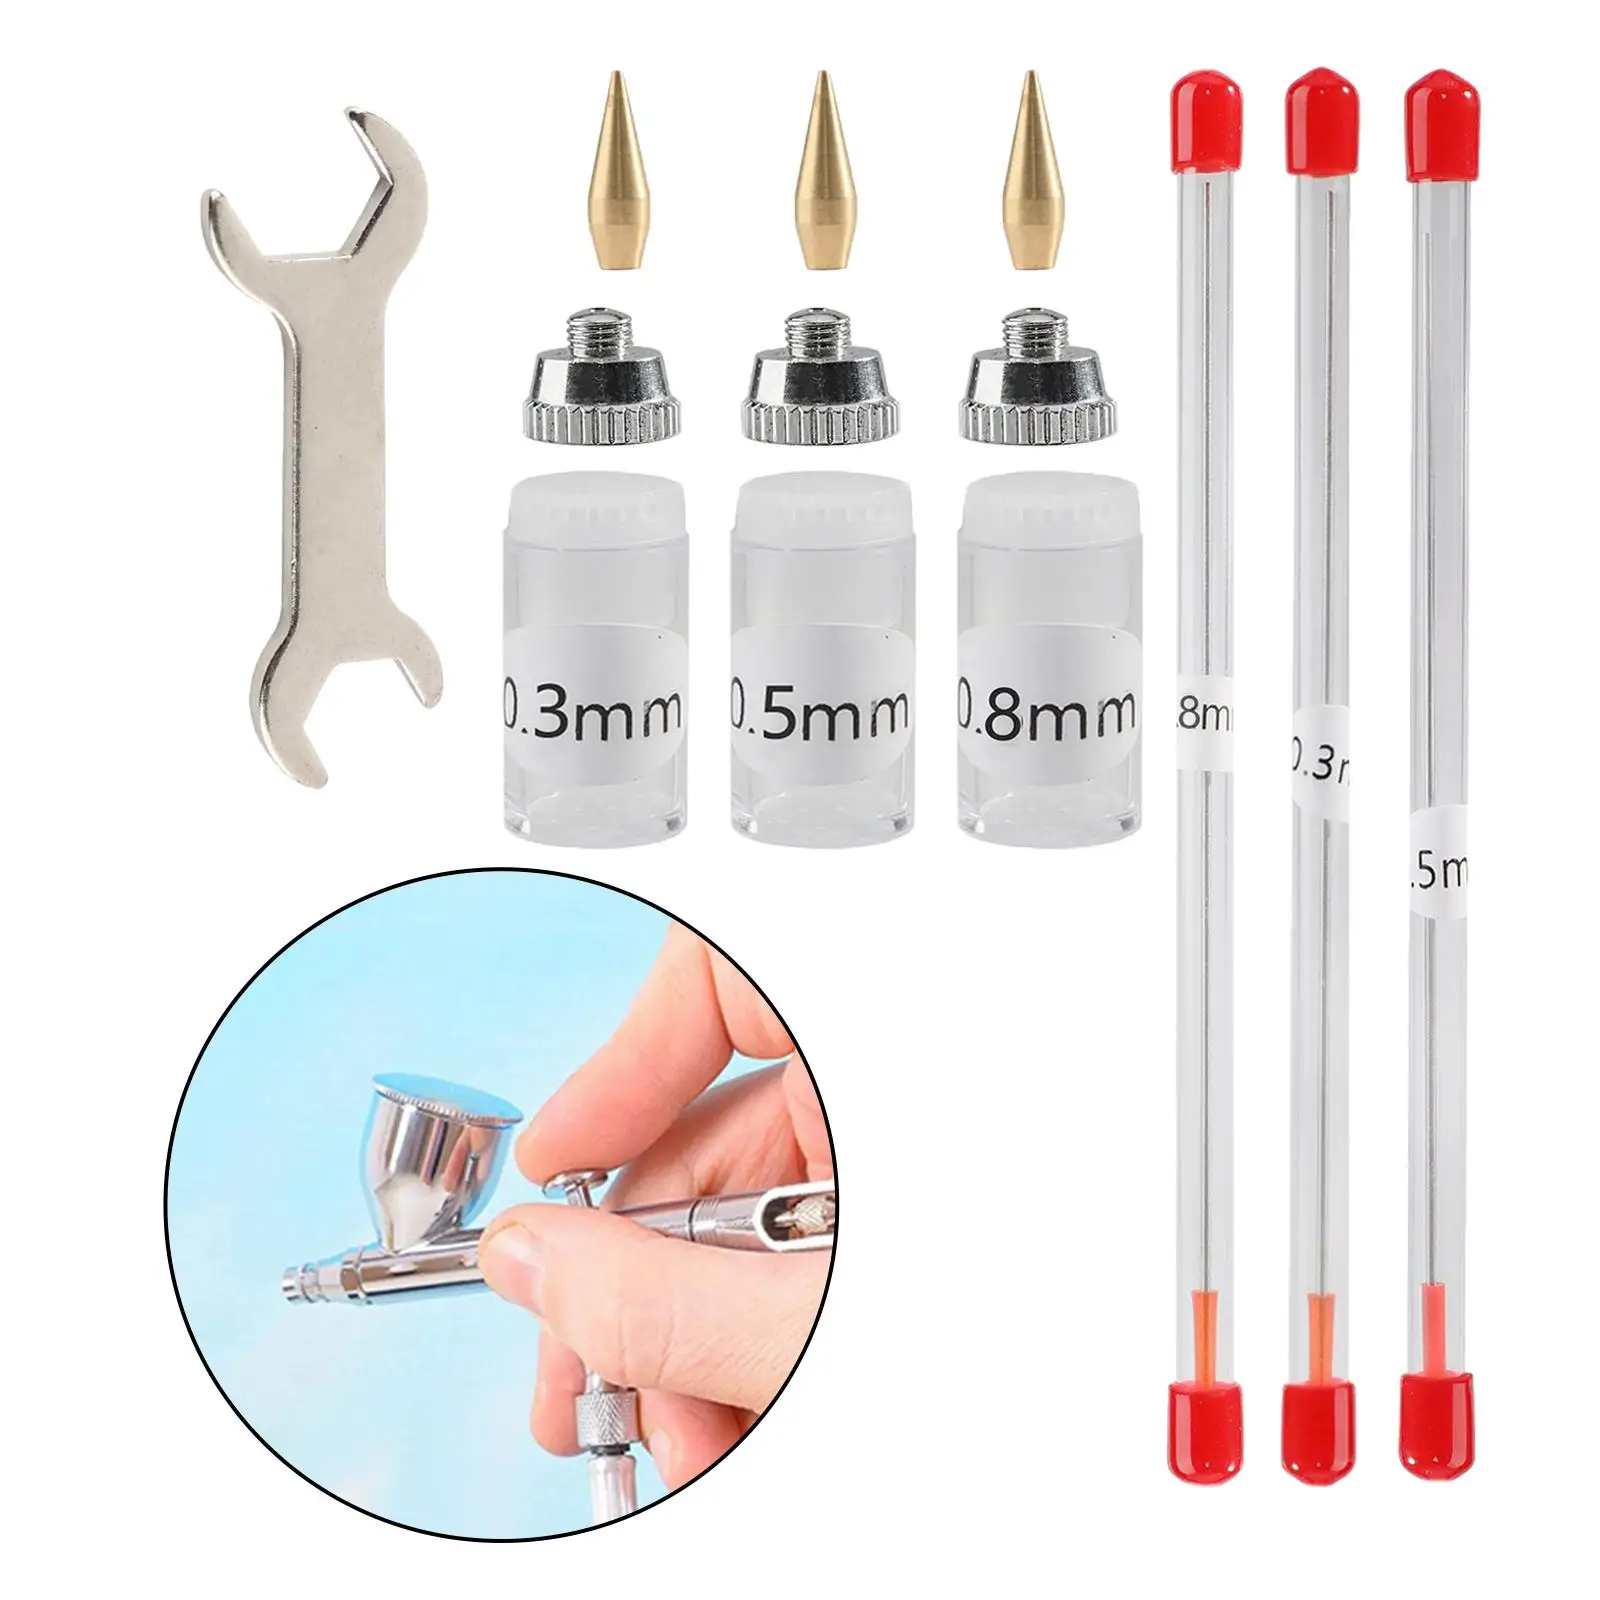 11x Airbrush Nozzle Kits Airbrush Sprayer Accessories Professional for Replacement Parts